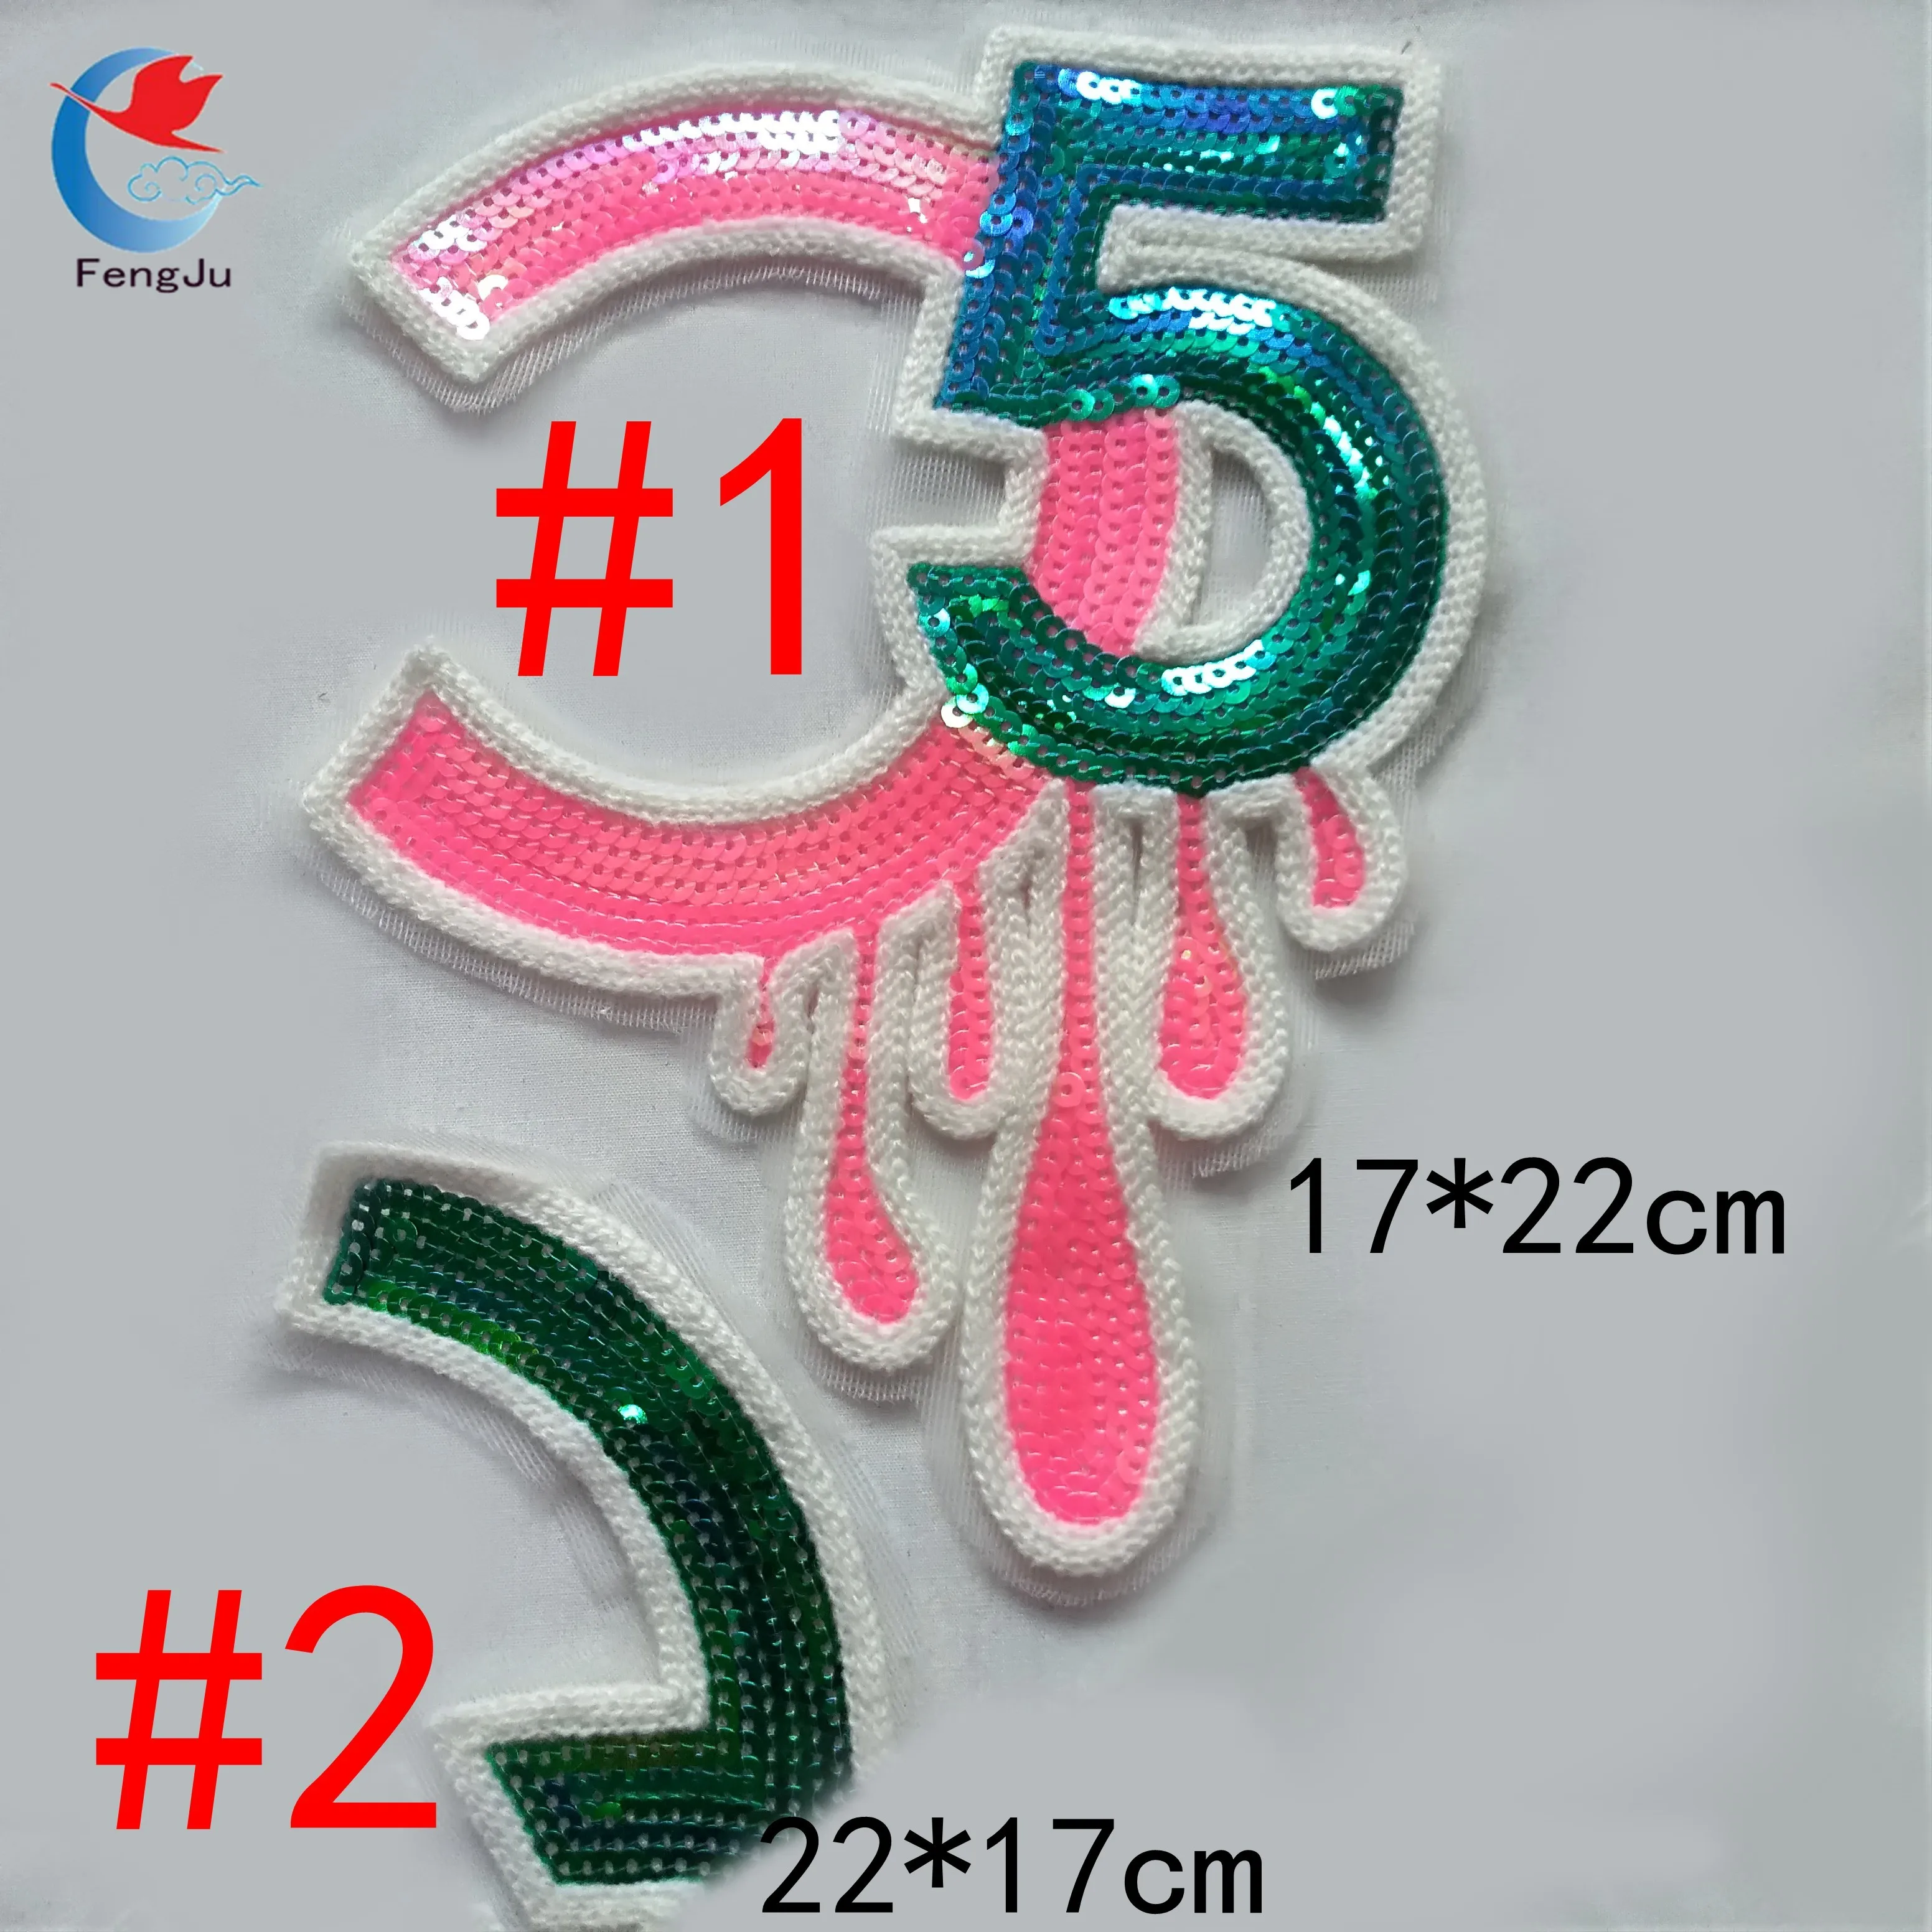 

FengJu strange letter patches for clothing Strips Sequined Patch Applique Iron on decoration fashion Letter Patches fabric 1pc